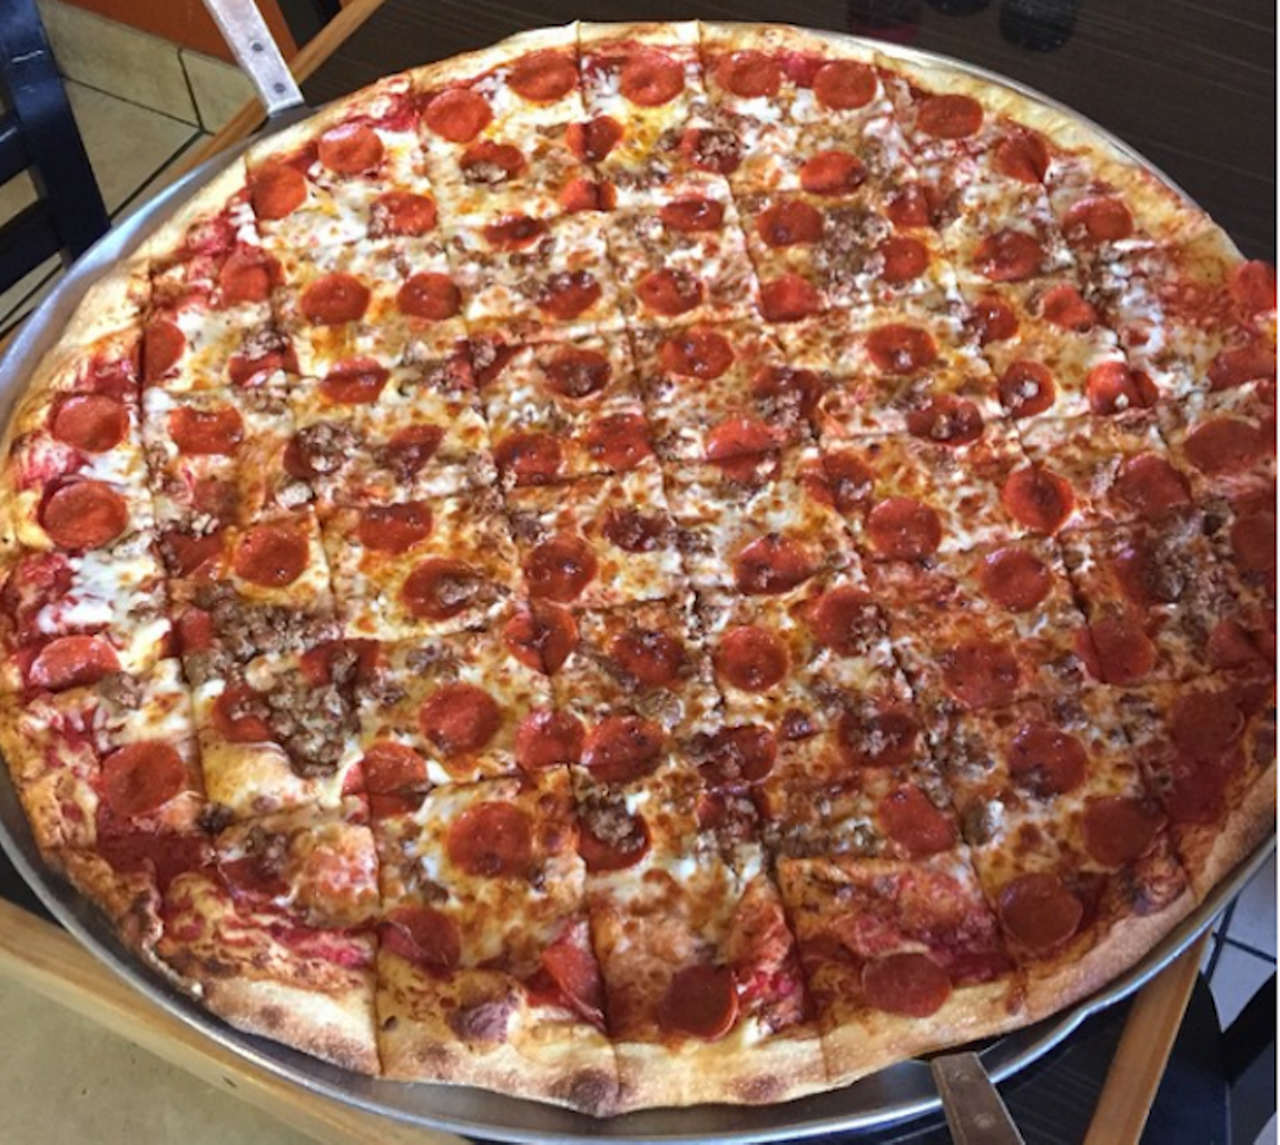 Pizza Xtreme
7250 S Kirkman Rd #103, Orlando, (407)-226-3333 
A 28-inch pizza. Two people. One Hour. No restroom breaks. Are you up to the challenge?
Photo via ckautobrokers/Instagram